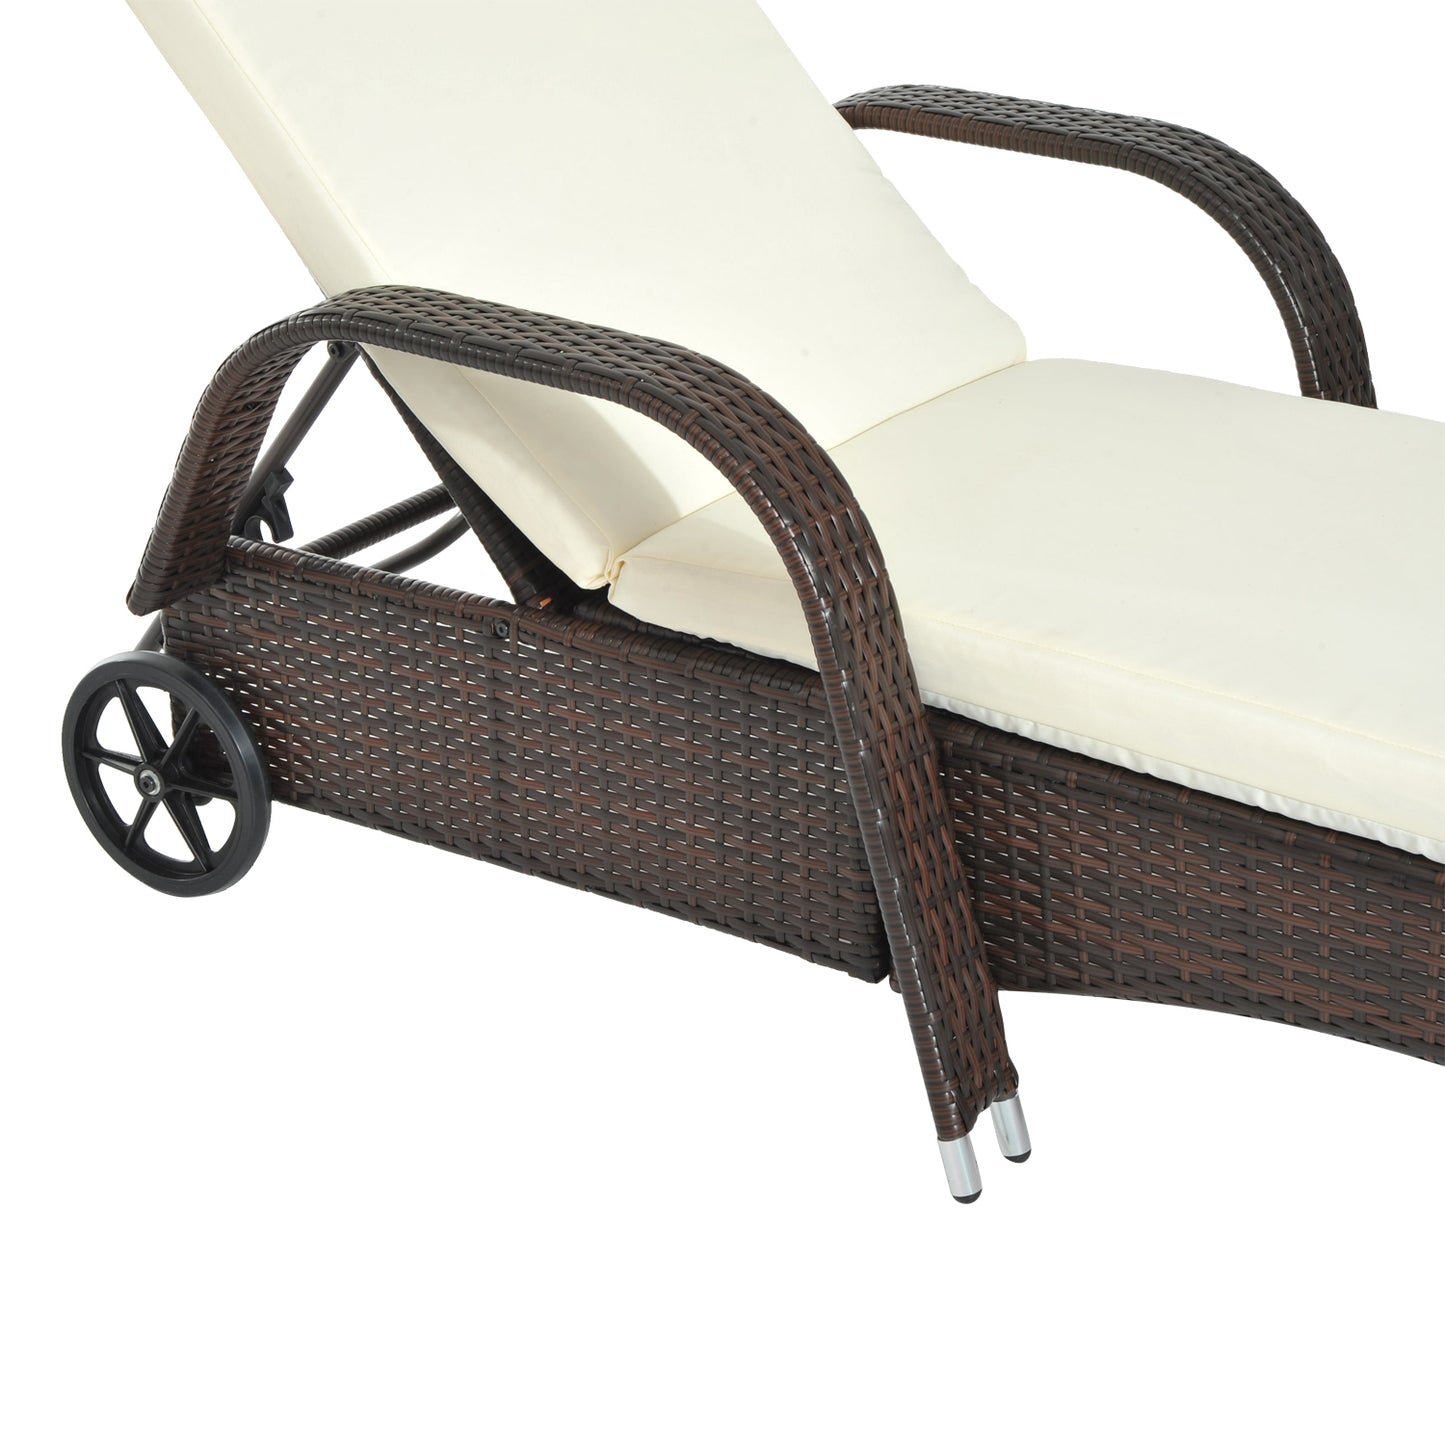 Outsunny Brown Rattan Sun Lounger w/ Adjustable Steel Frame,200Lx73Wx56-103H cm